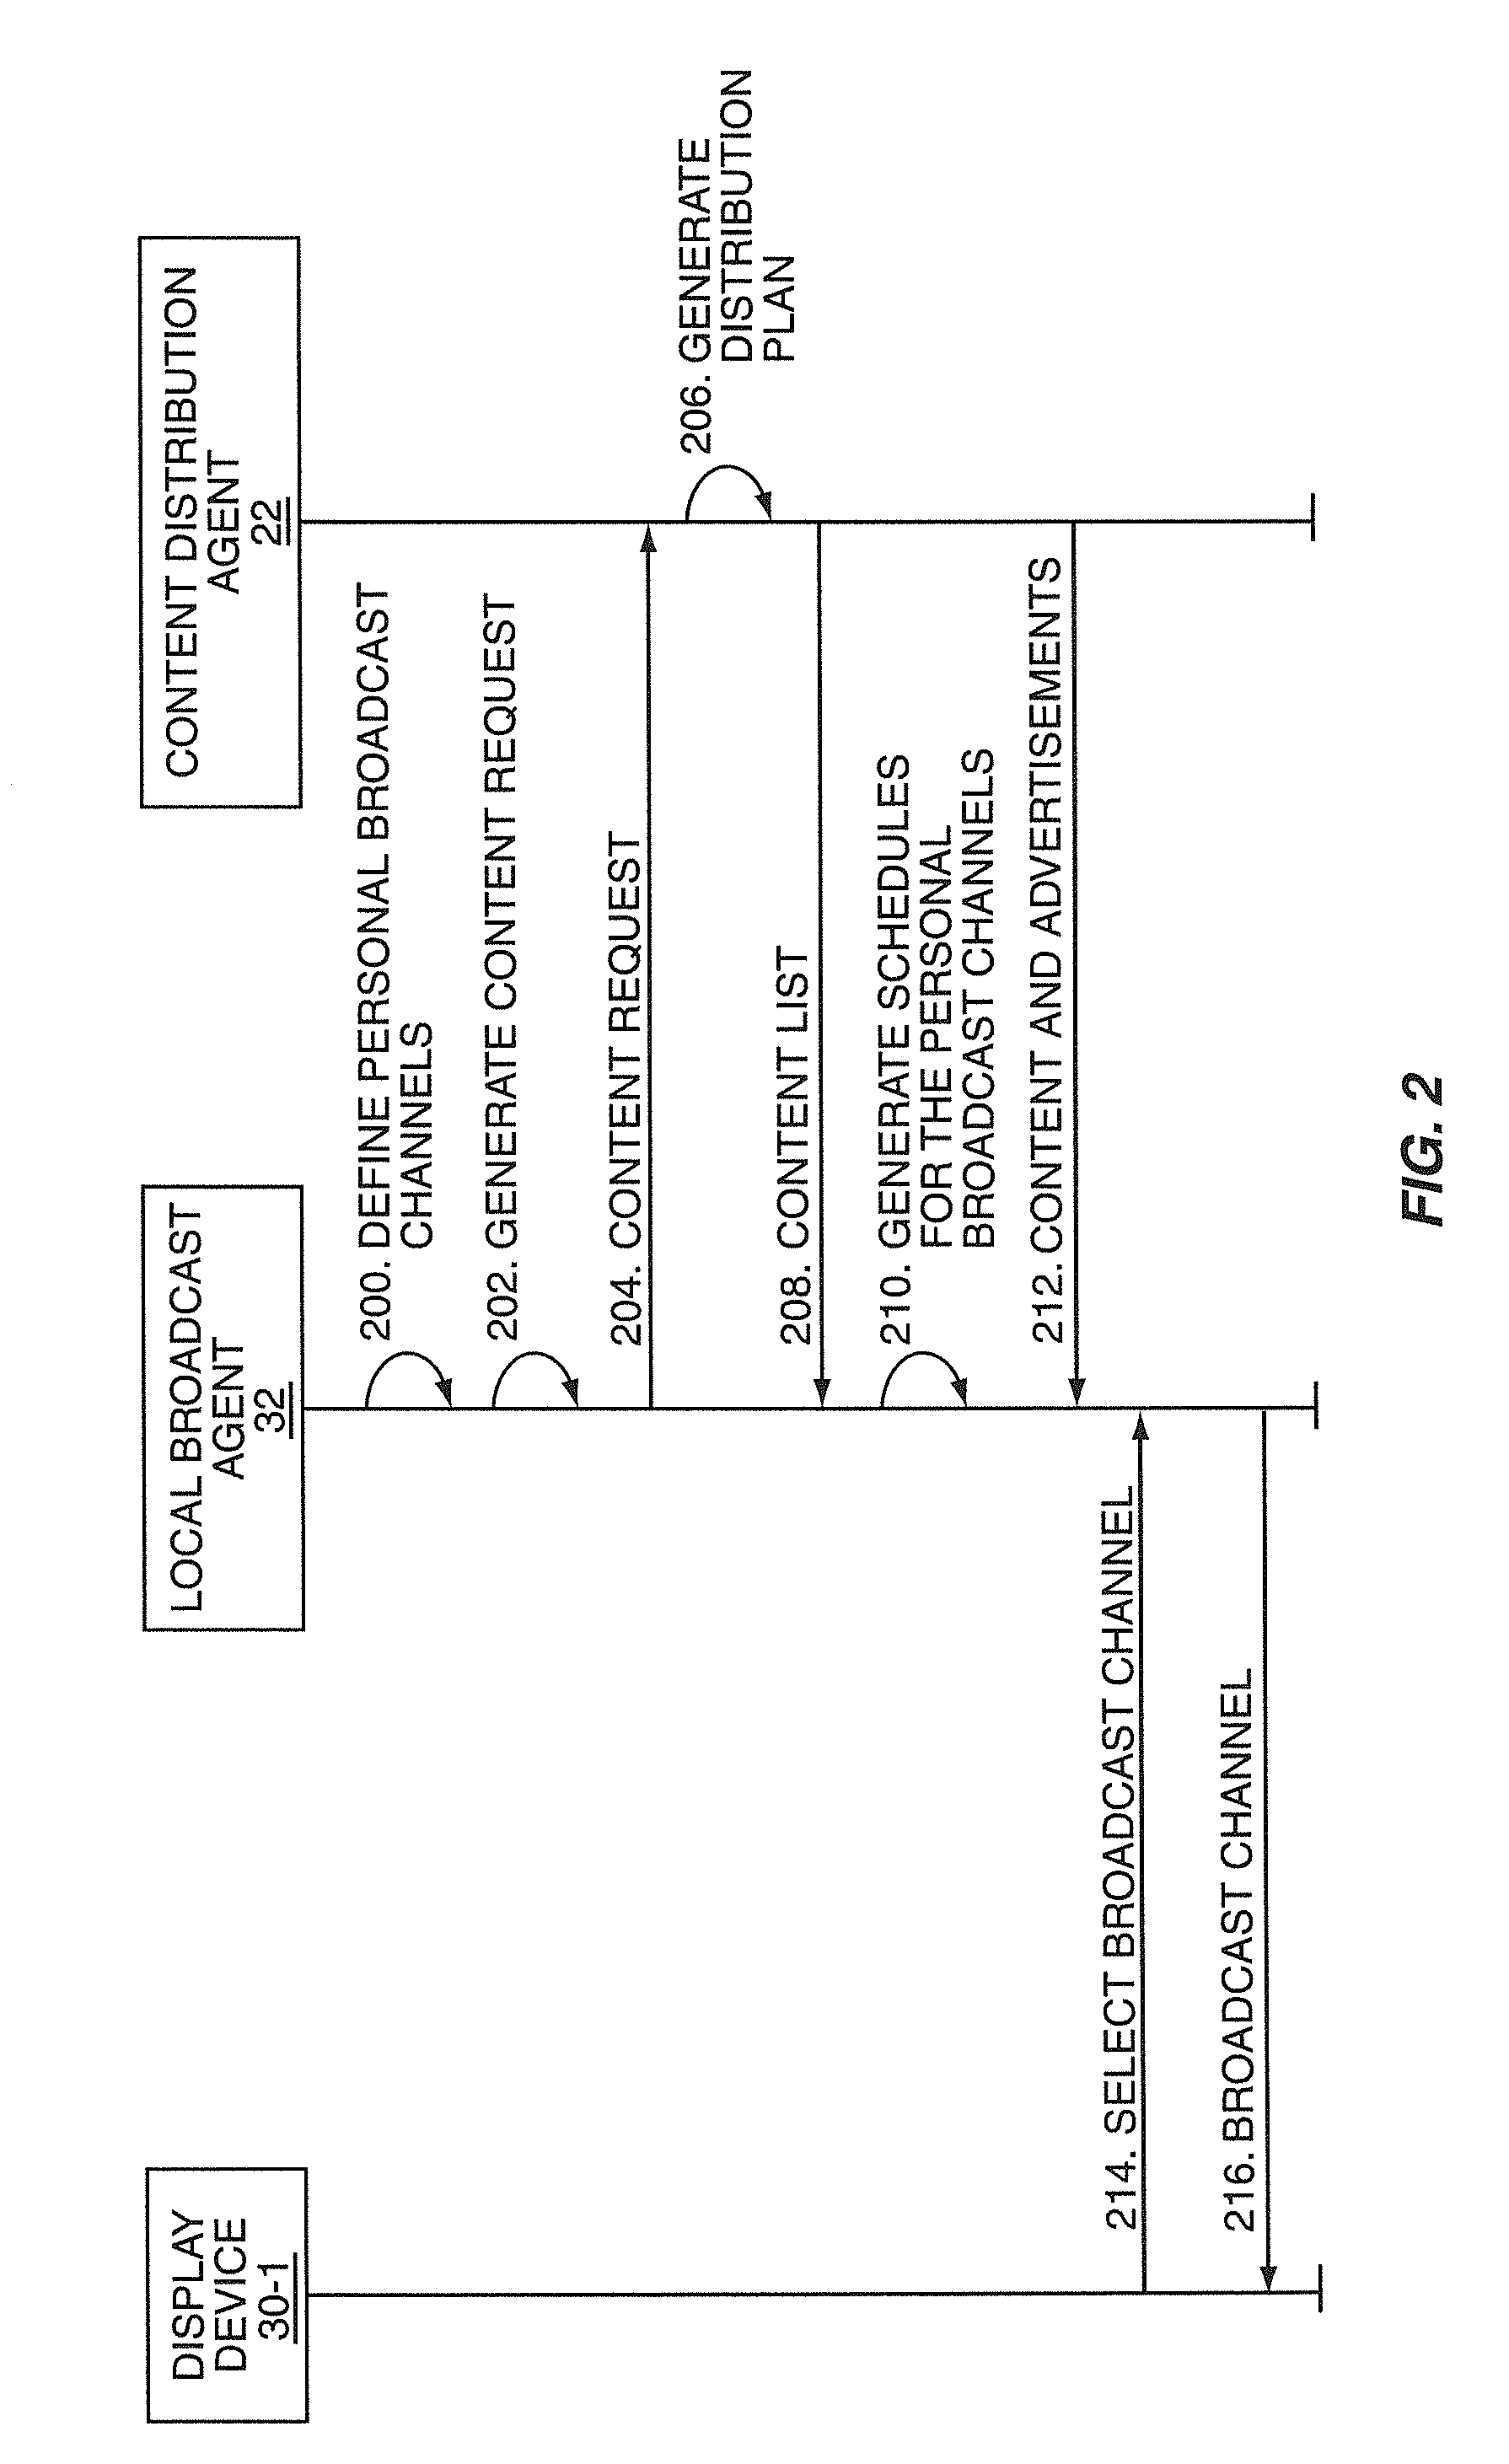 System and method providing peer review and distribution of digital content